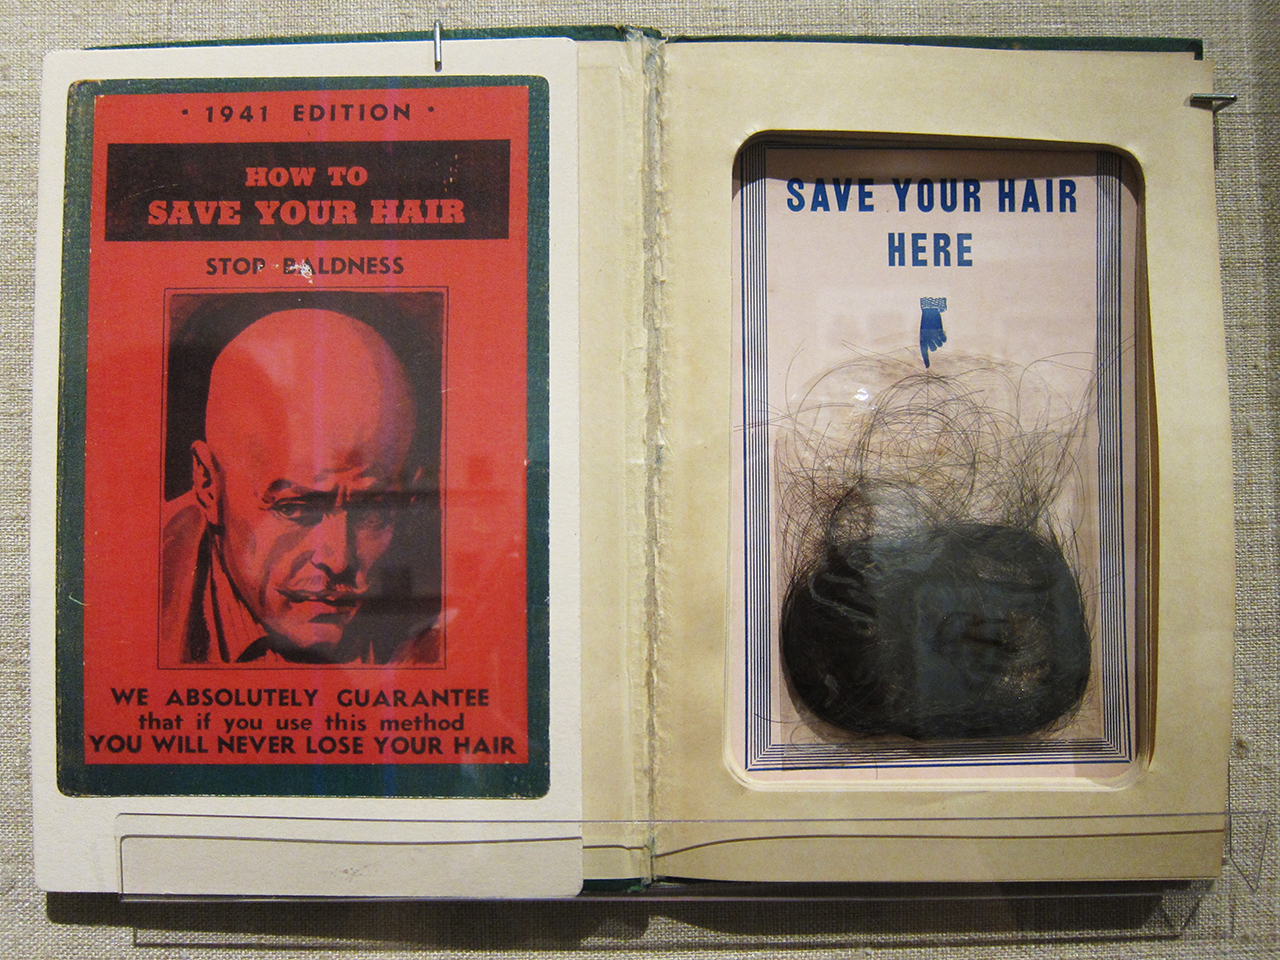 "How to Save Your Hair" (1941 edition of mid-19th c. publication)